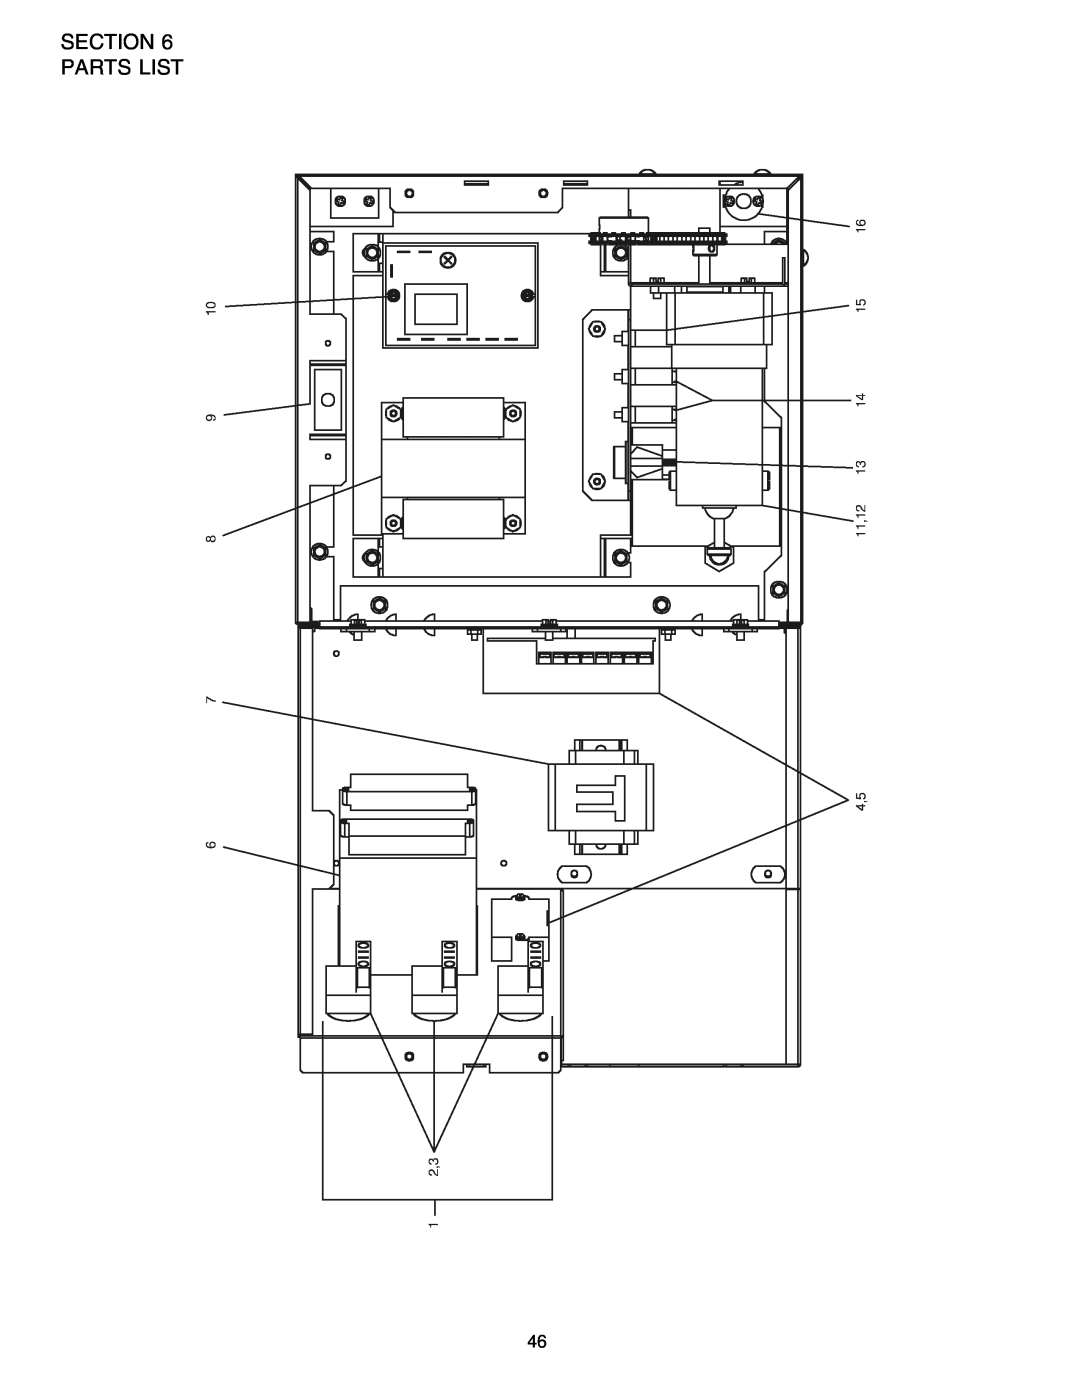 Middleby Marshall PS520 installation manual English, Parts List 